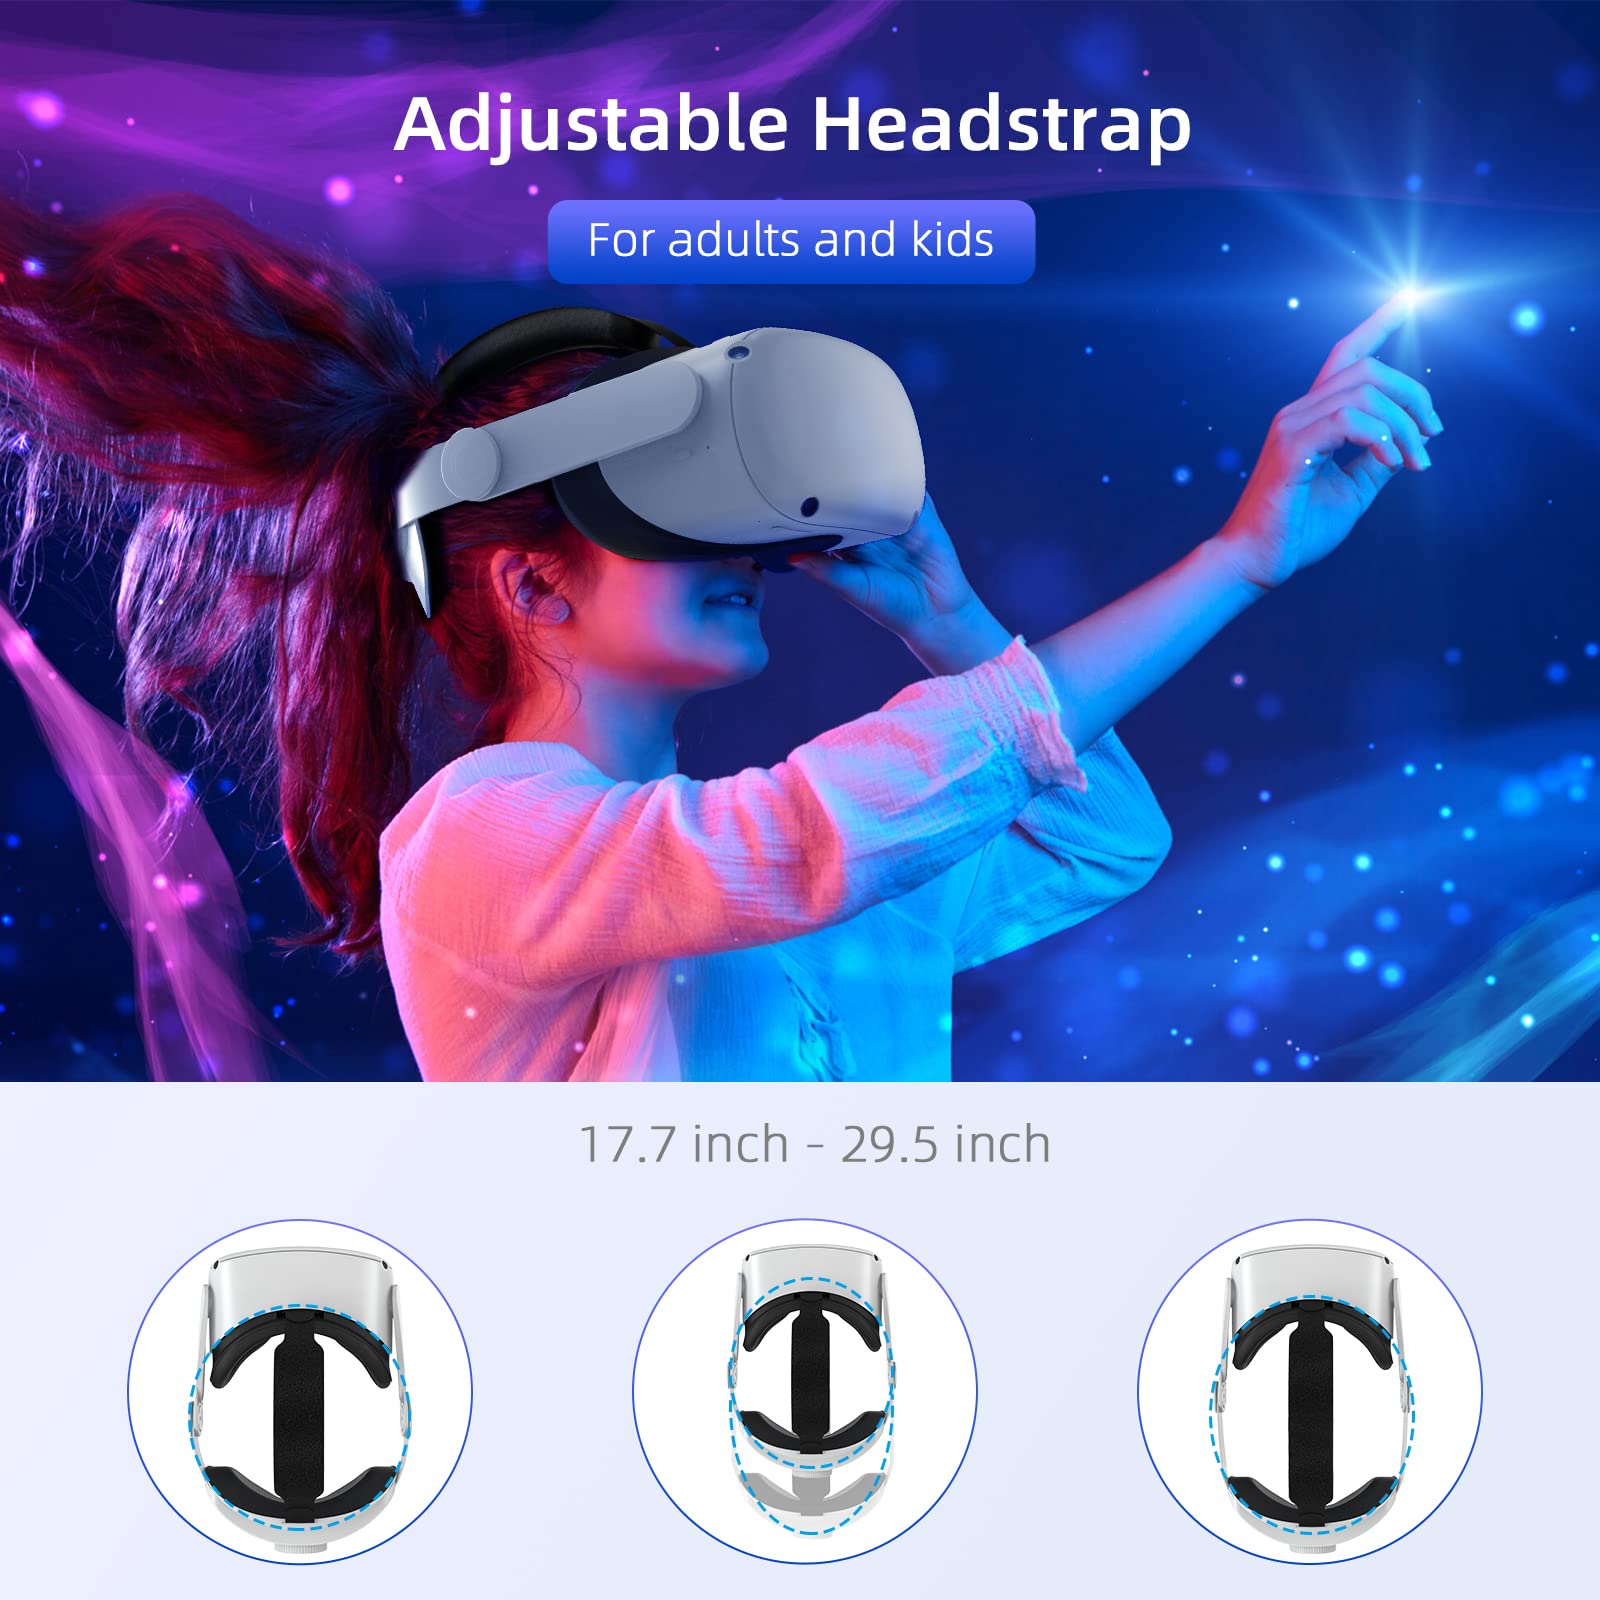 Head Strap Compatible with Oculus Quest 2,Meta Quest 2 Accessories Adjustable Elite Strap Replacement for Enhanced Comfort Support and Gaming Immersion in VR (Comfort Head Strap only)